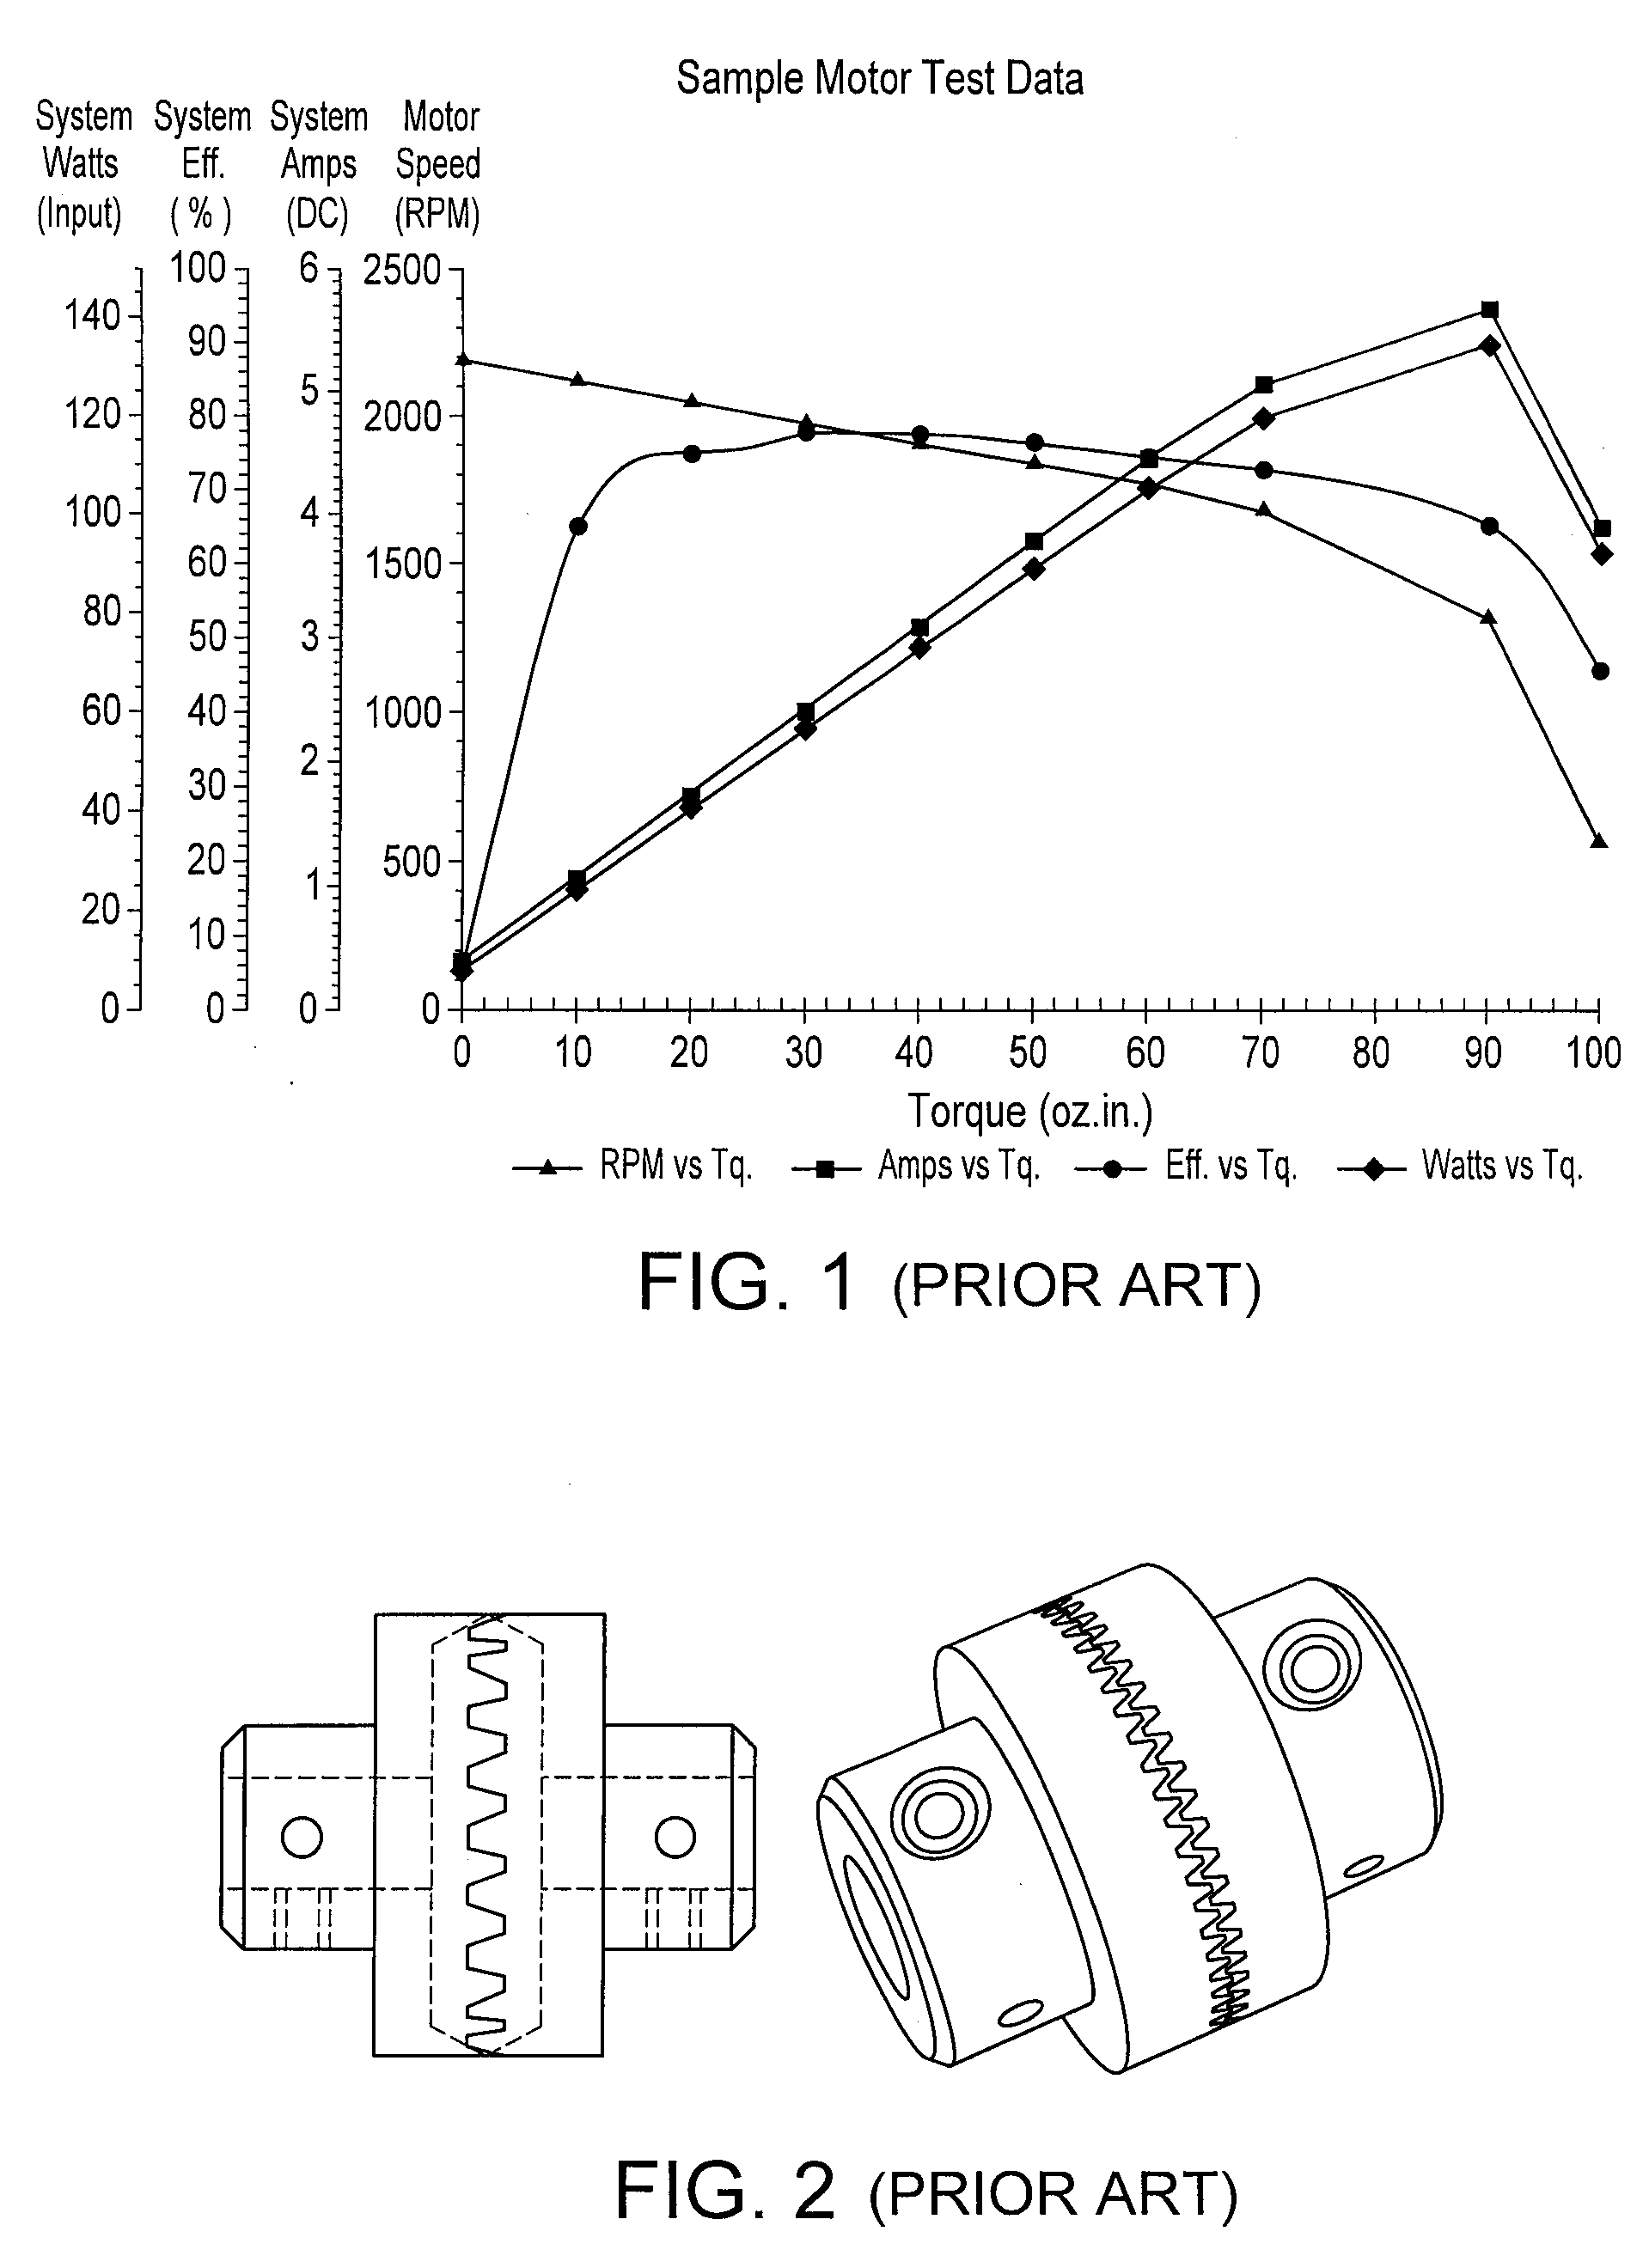 System, Method and Computer Program for Remotely Testing System Components Over A Network